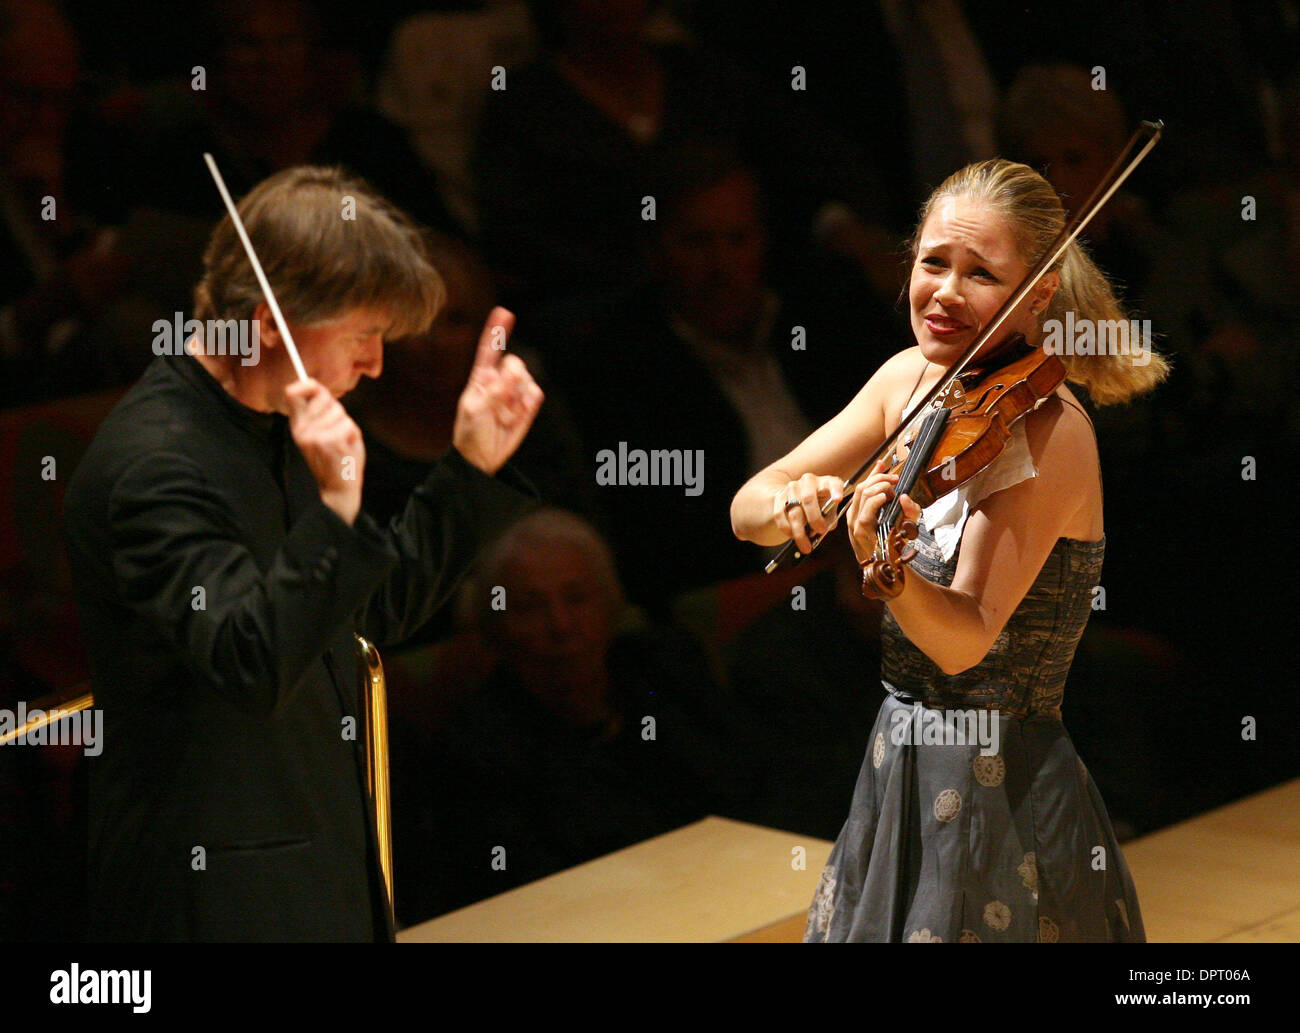 Apr 12, 2009 - Los Angeles, California, USA - Violinist LEILA JOSEFOWICZ gives the world premiere of ESA-PEKKA SALONEN'S Violin Concerto at his next-to-last program as music director of the Los Angeles Philharmonic on Thursday in Walt Disney Concert Hall in Los Angeles. (Credit Image: © Ringo Chiu/ZUMA Press) Stock Photo